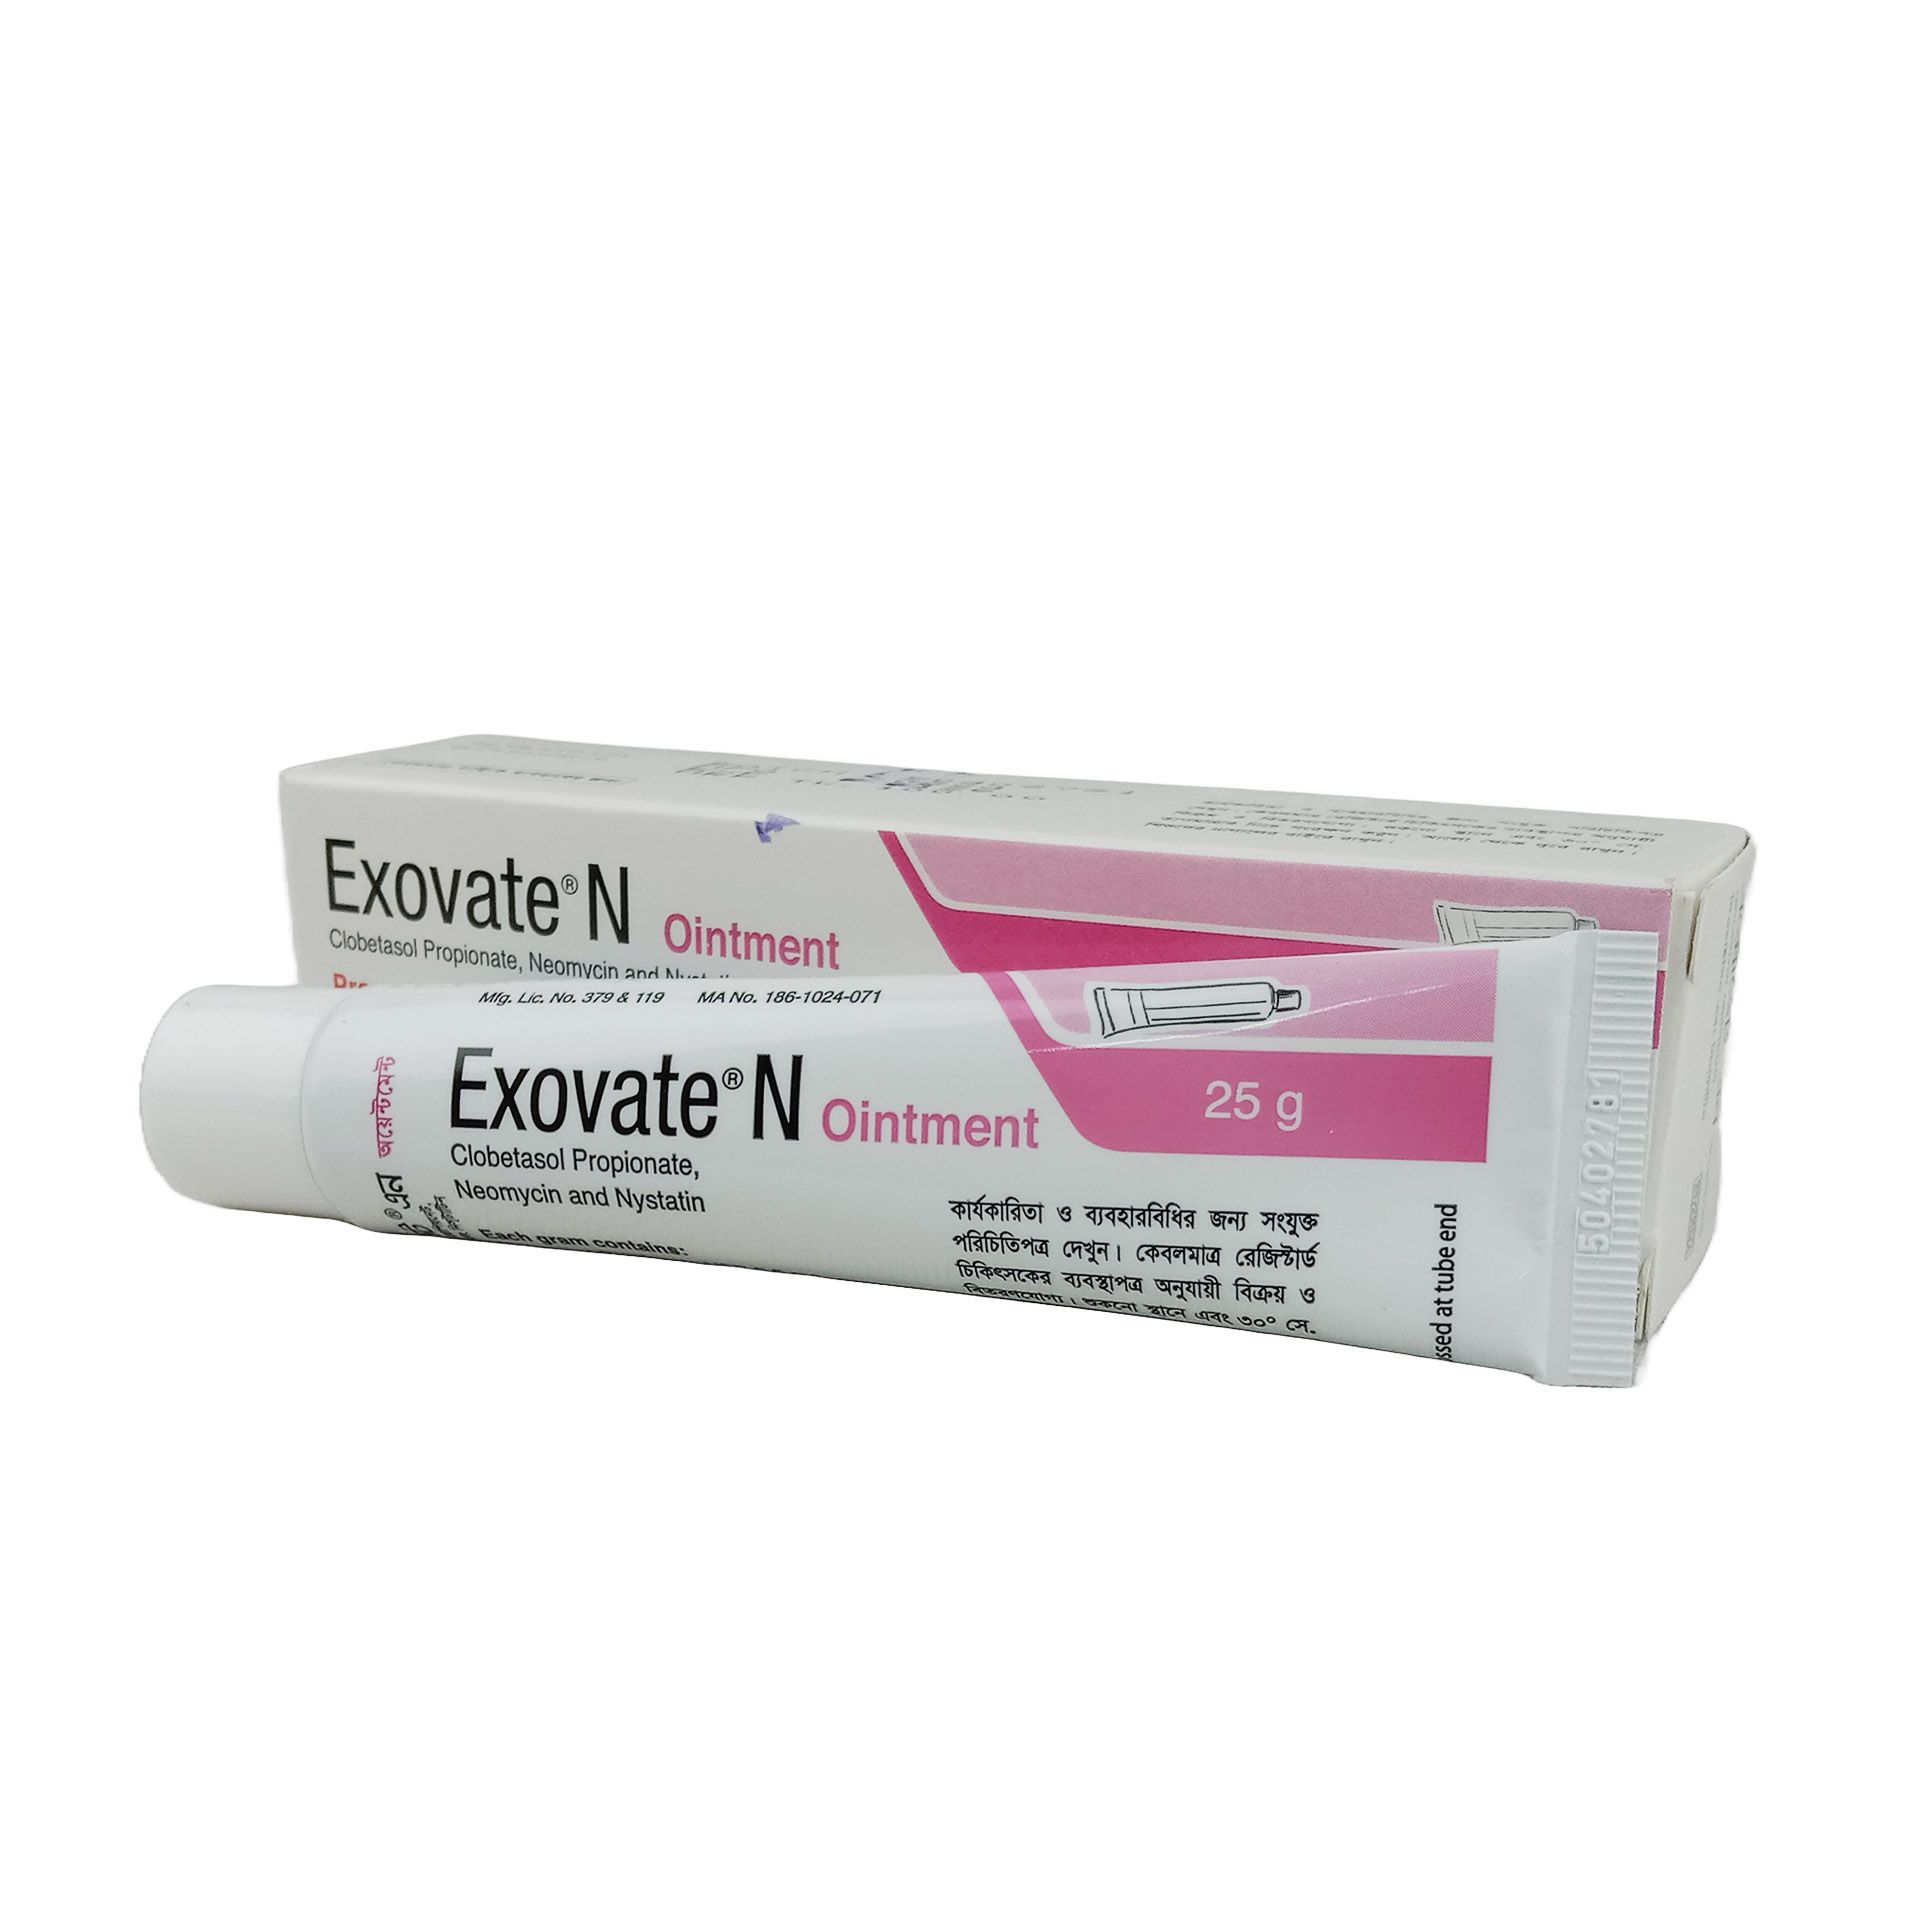 Exovate N Ointment 0.05%+0.50%+100000IU ointment